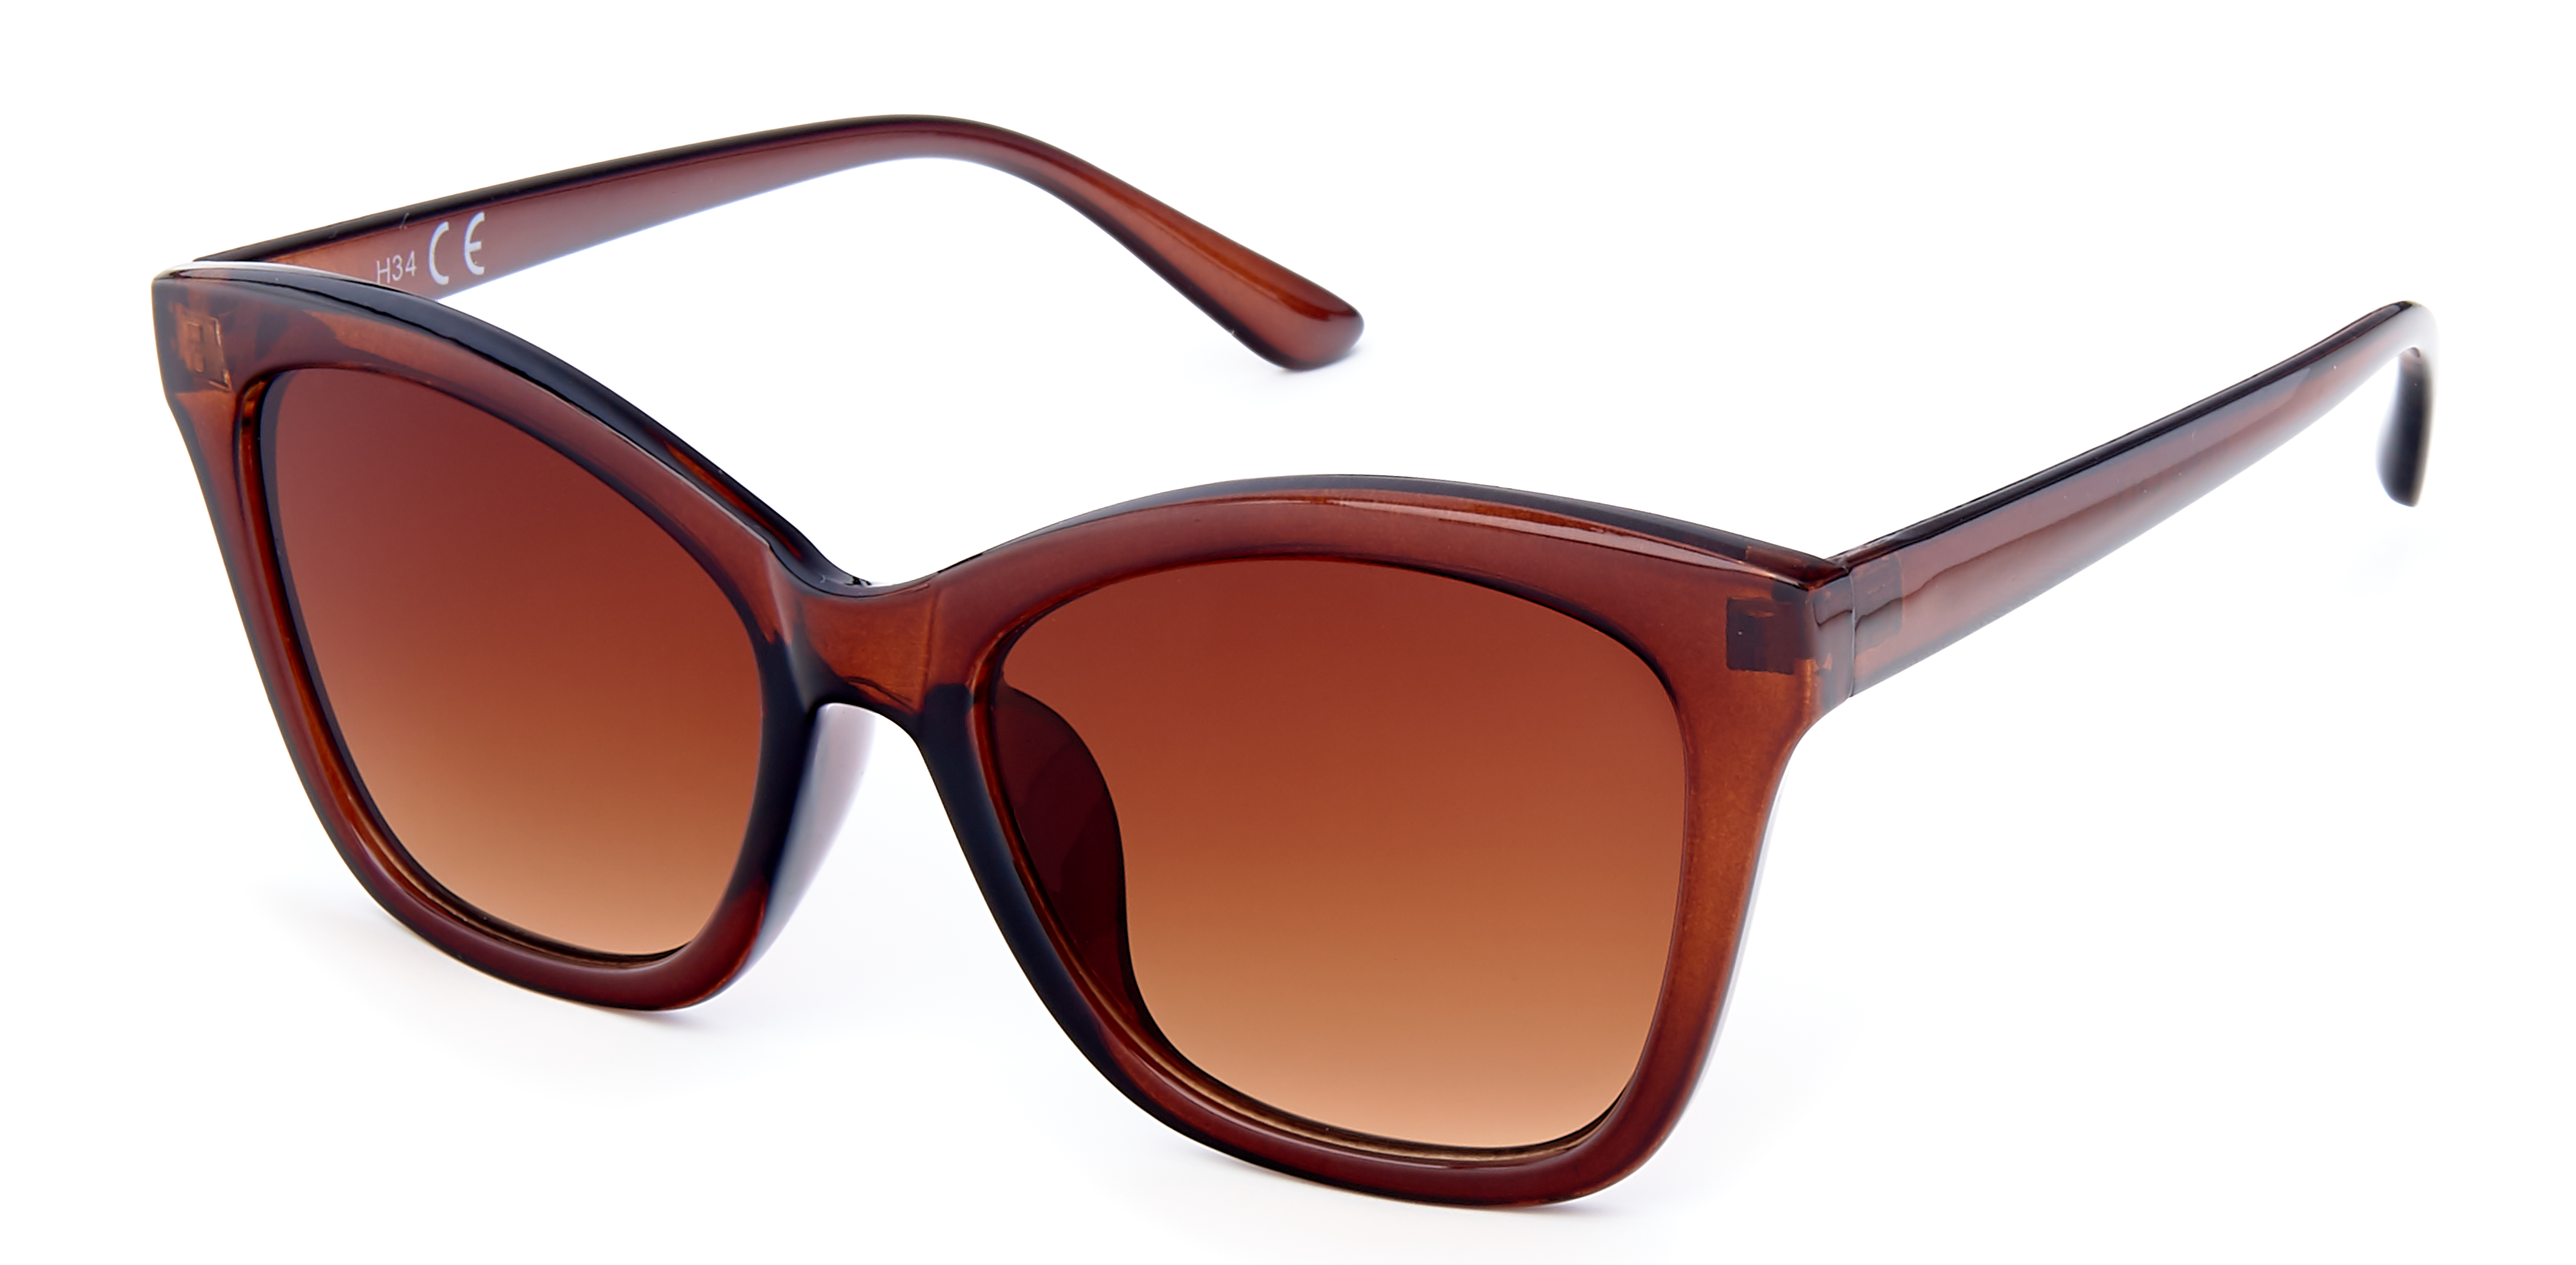 Cateye square transparent brown